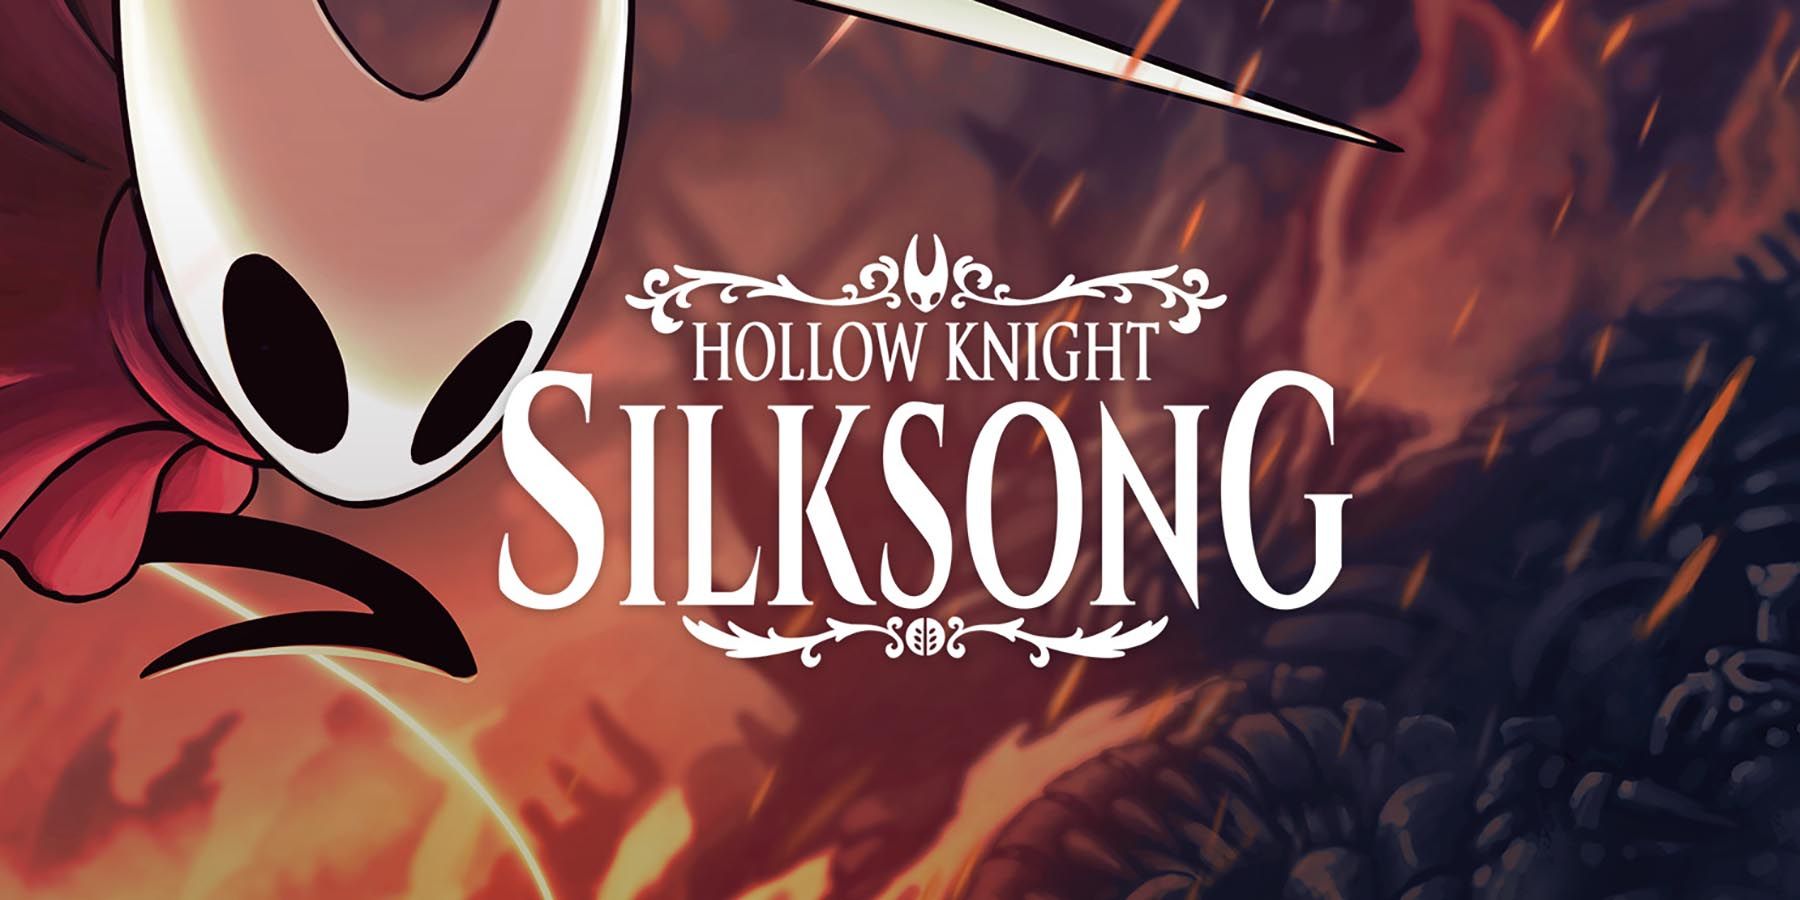 hollow knight silksong release date when